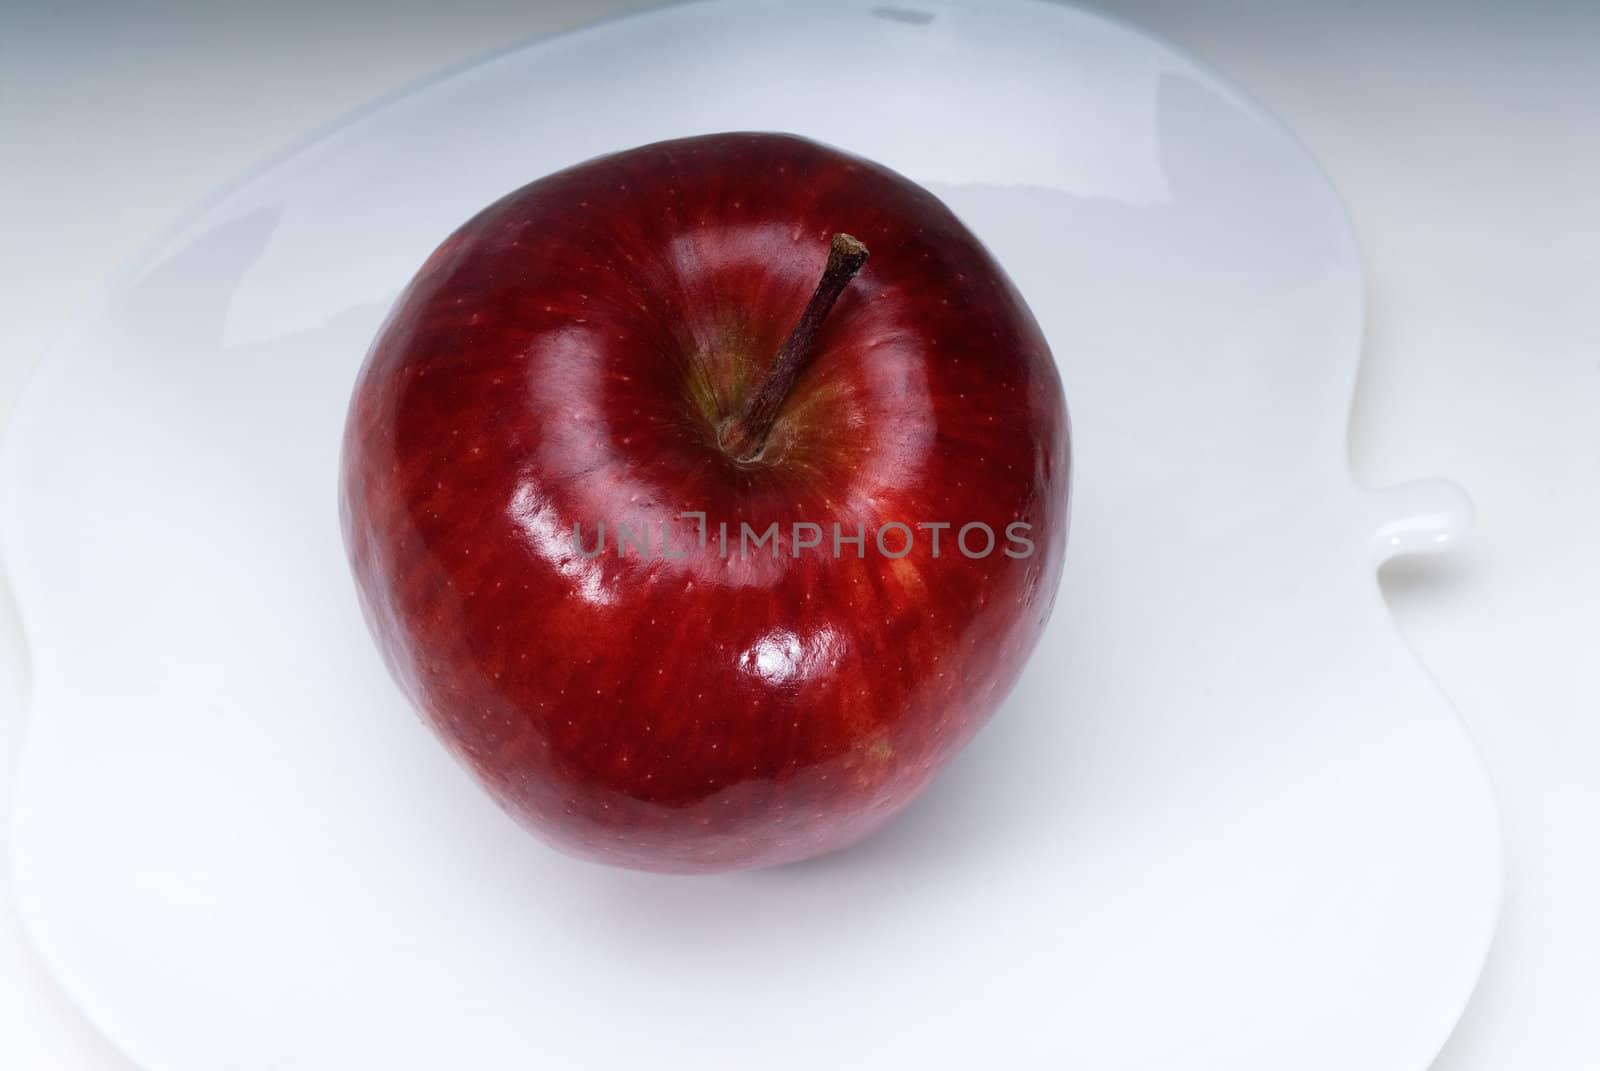 red apple on a apple shaped dish isolated over white